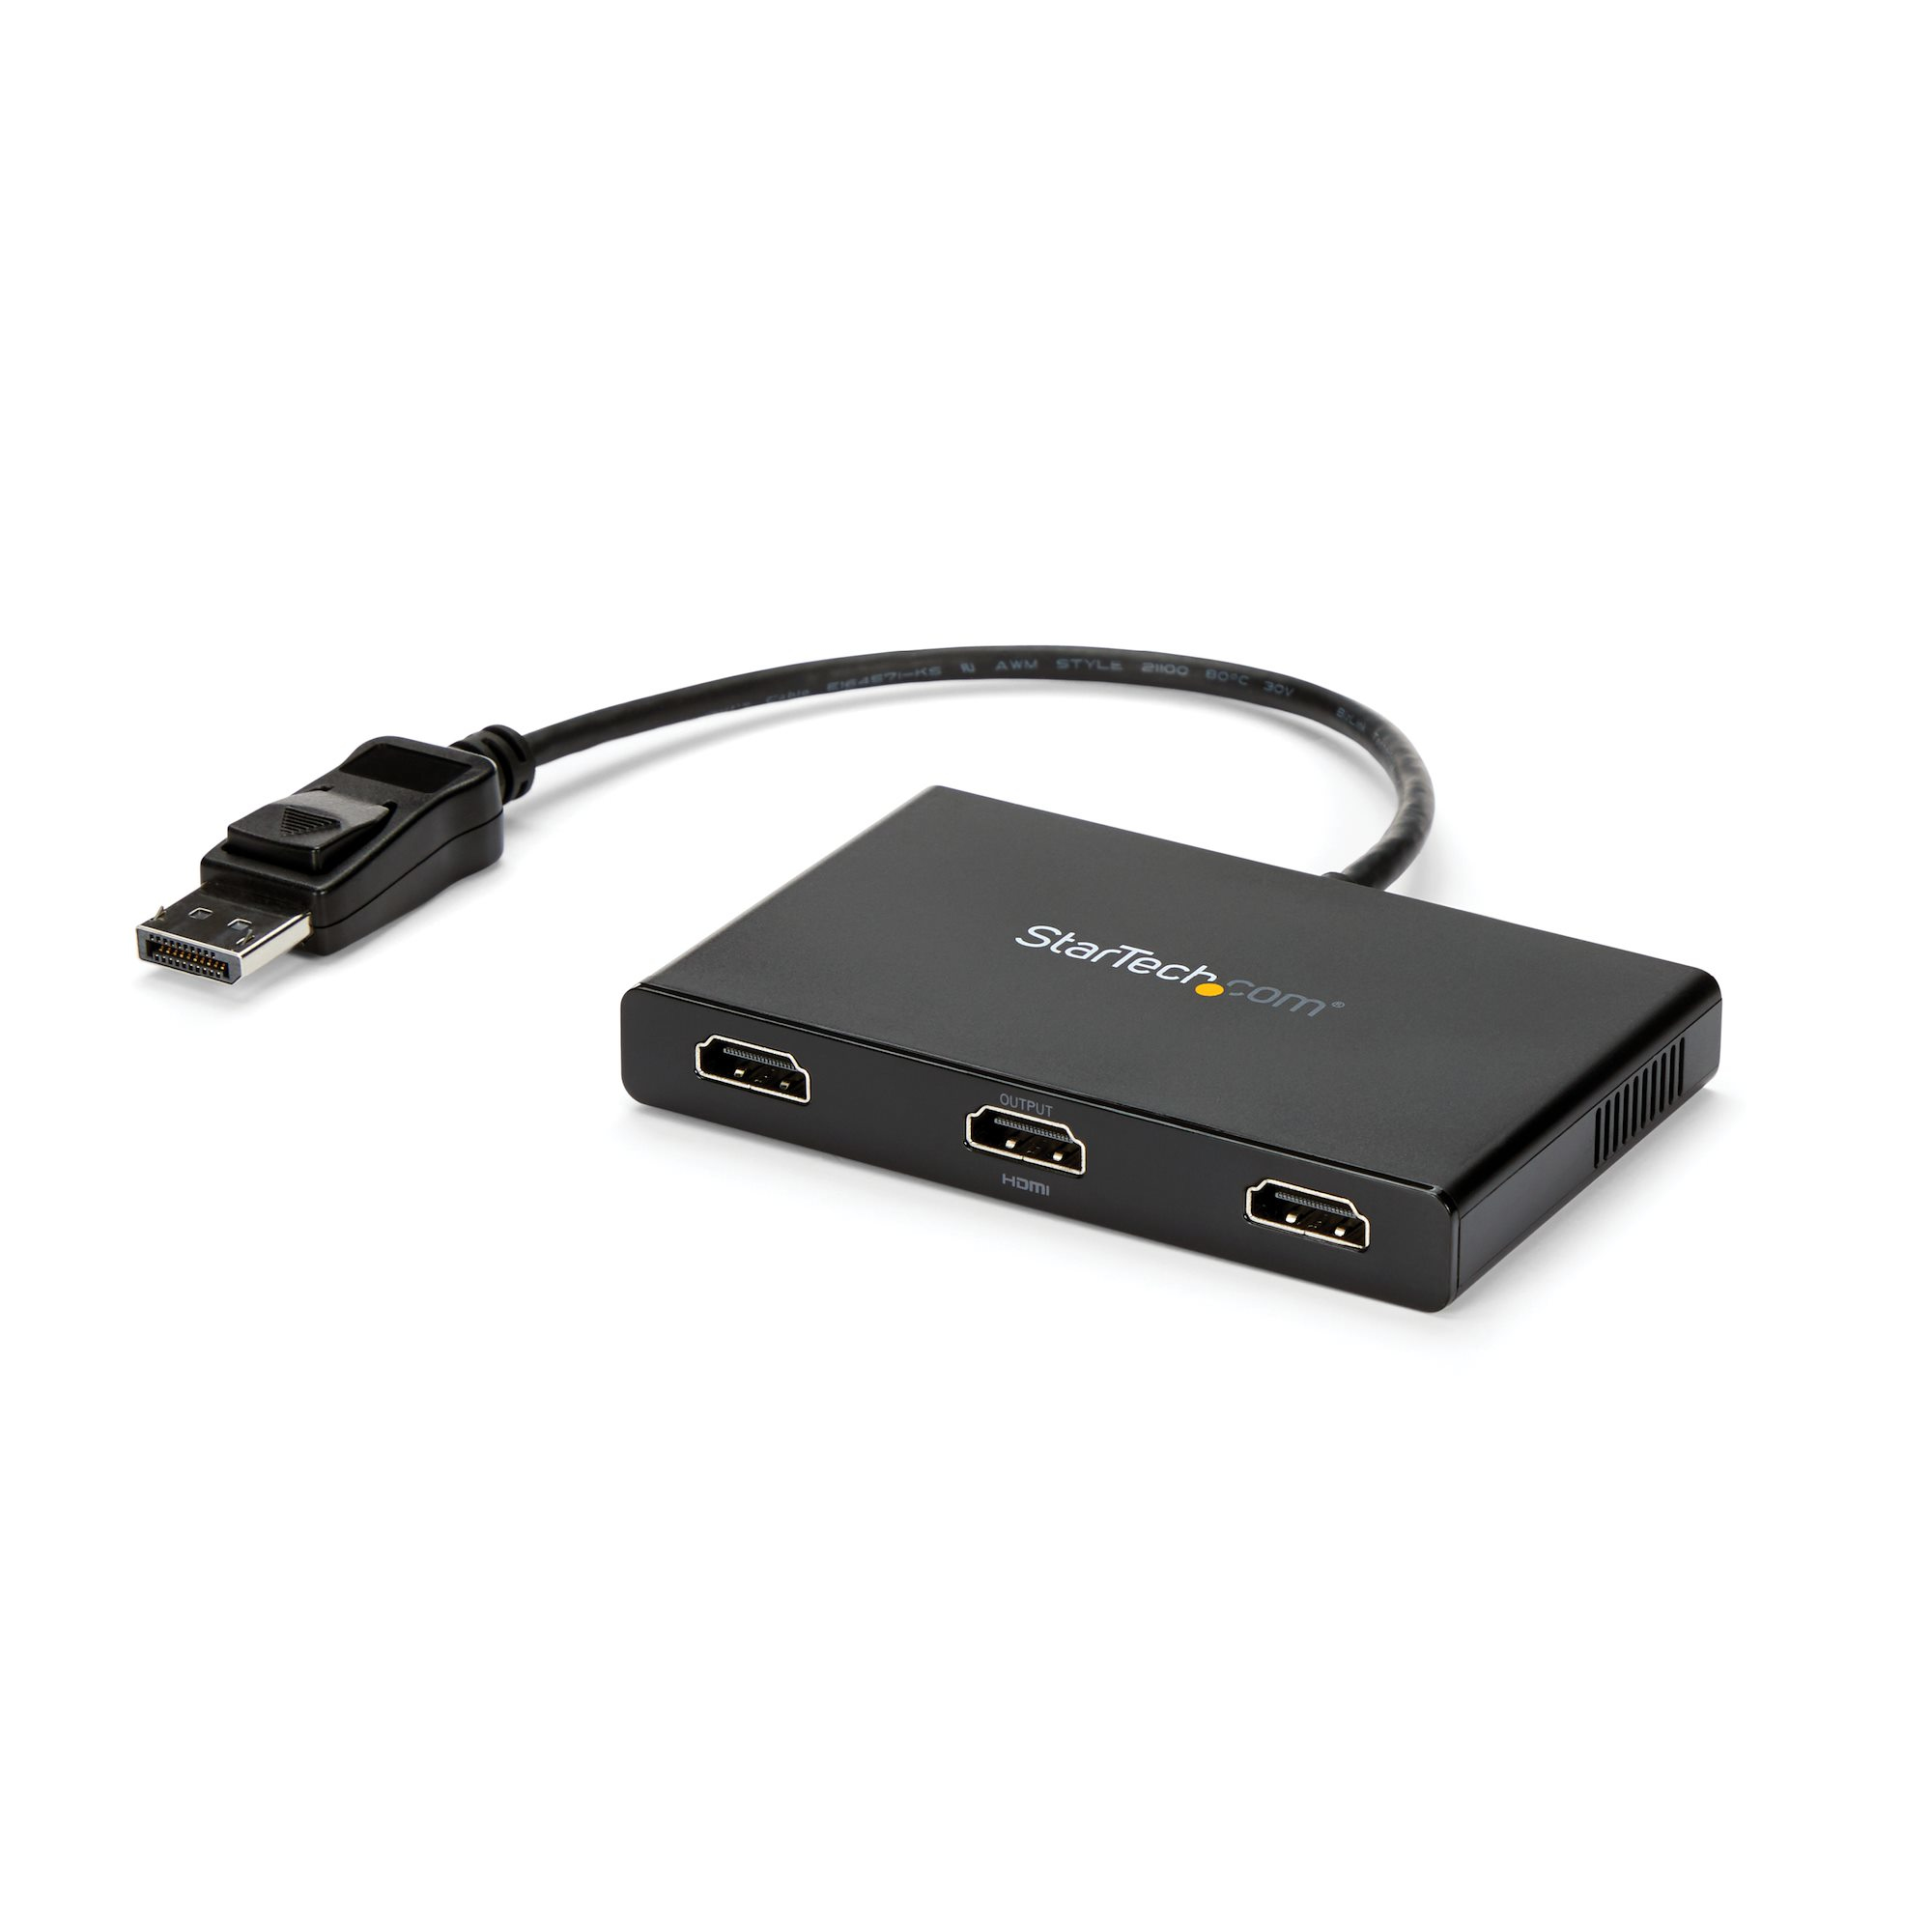 StarTech.com 3-Port Multi Monitor Adapter - DisplayPort 1.2 to 3x HDMI MST Hub - Triple 1080p HDMI Monitors - Video Splitter for Extended Desktop Mode on Windows PCs Only - DP to 3x HDMI